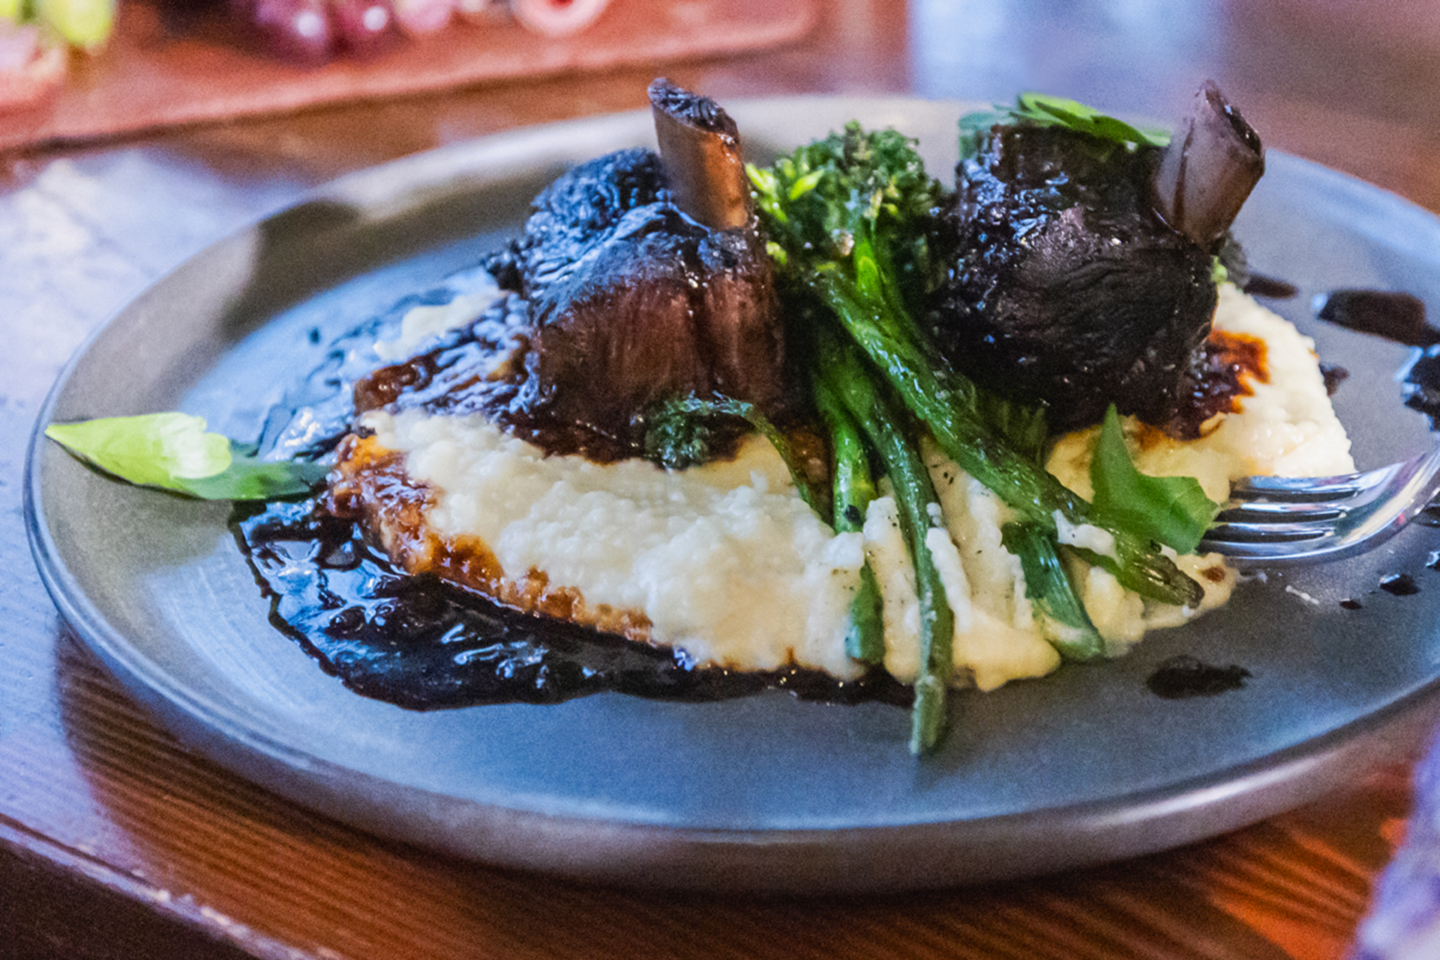 Bison Short Ribs to satisfy your Montana-sized appetite!